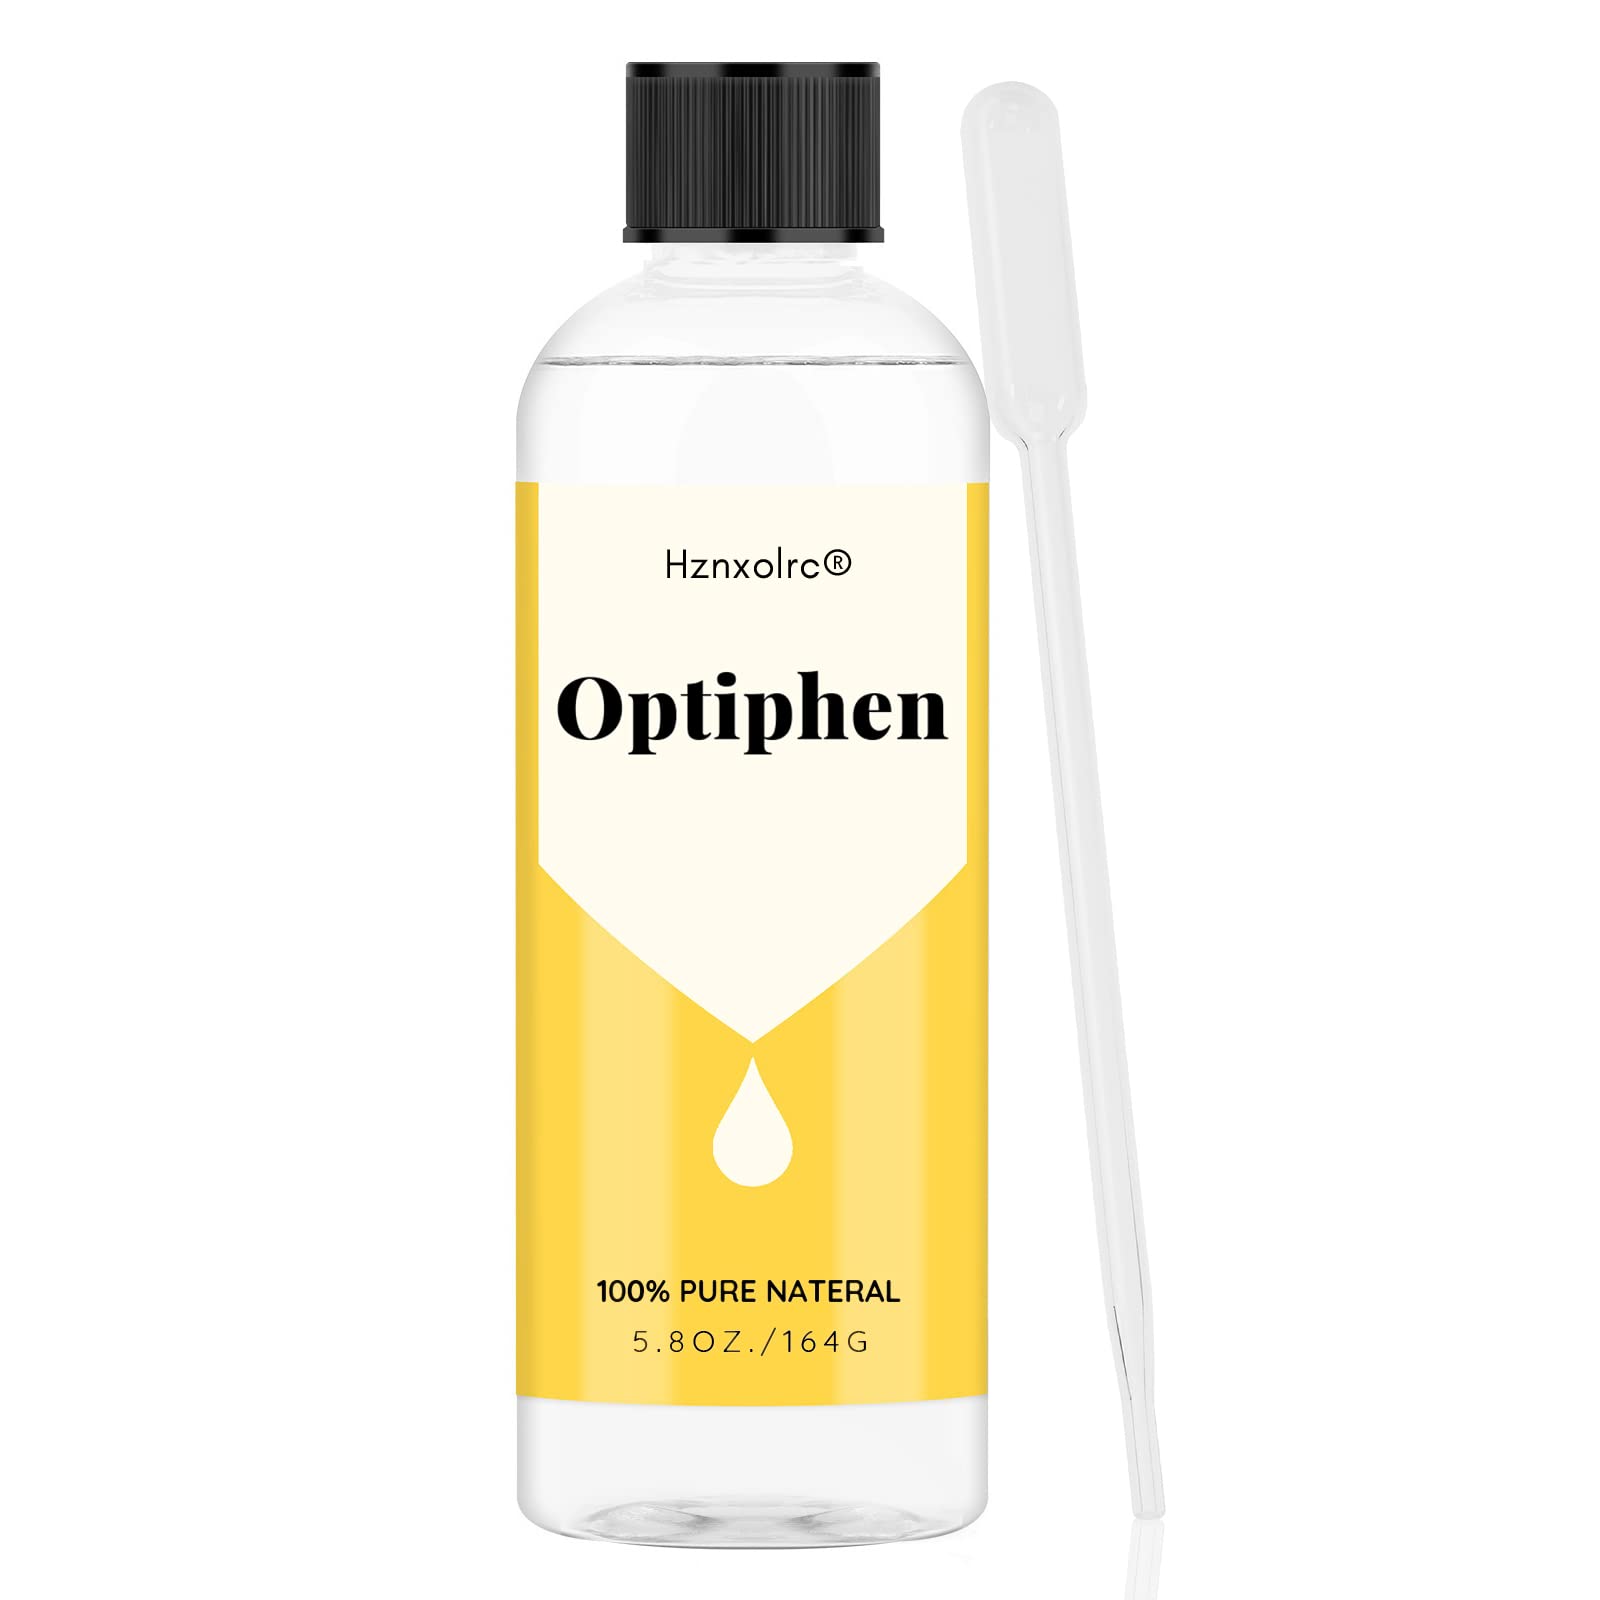 OPTIPHEN PLUS - Optiphen + Natural Preservative For Lotions Creams Absorbic  Acid